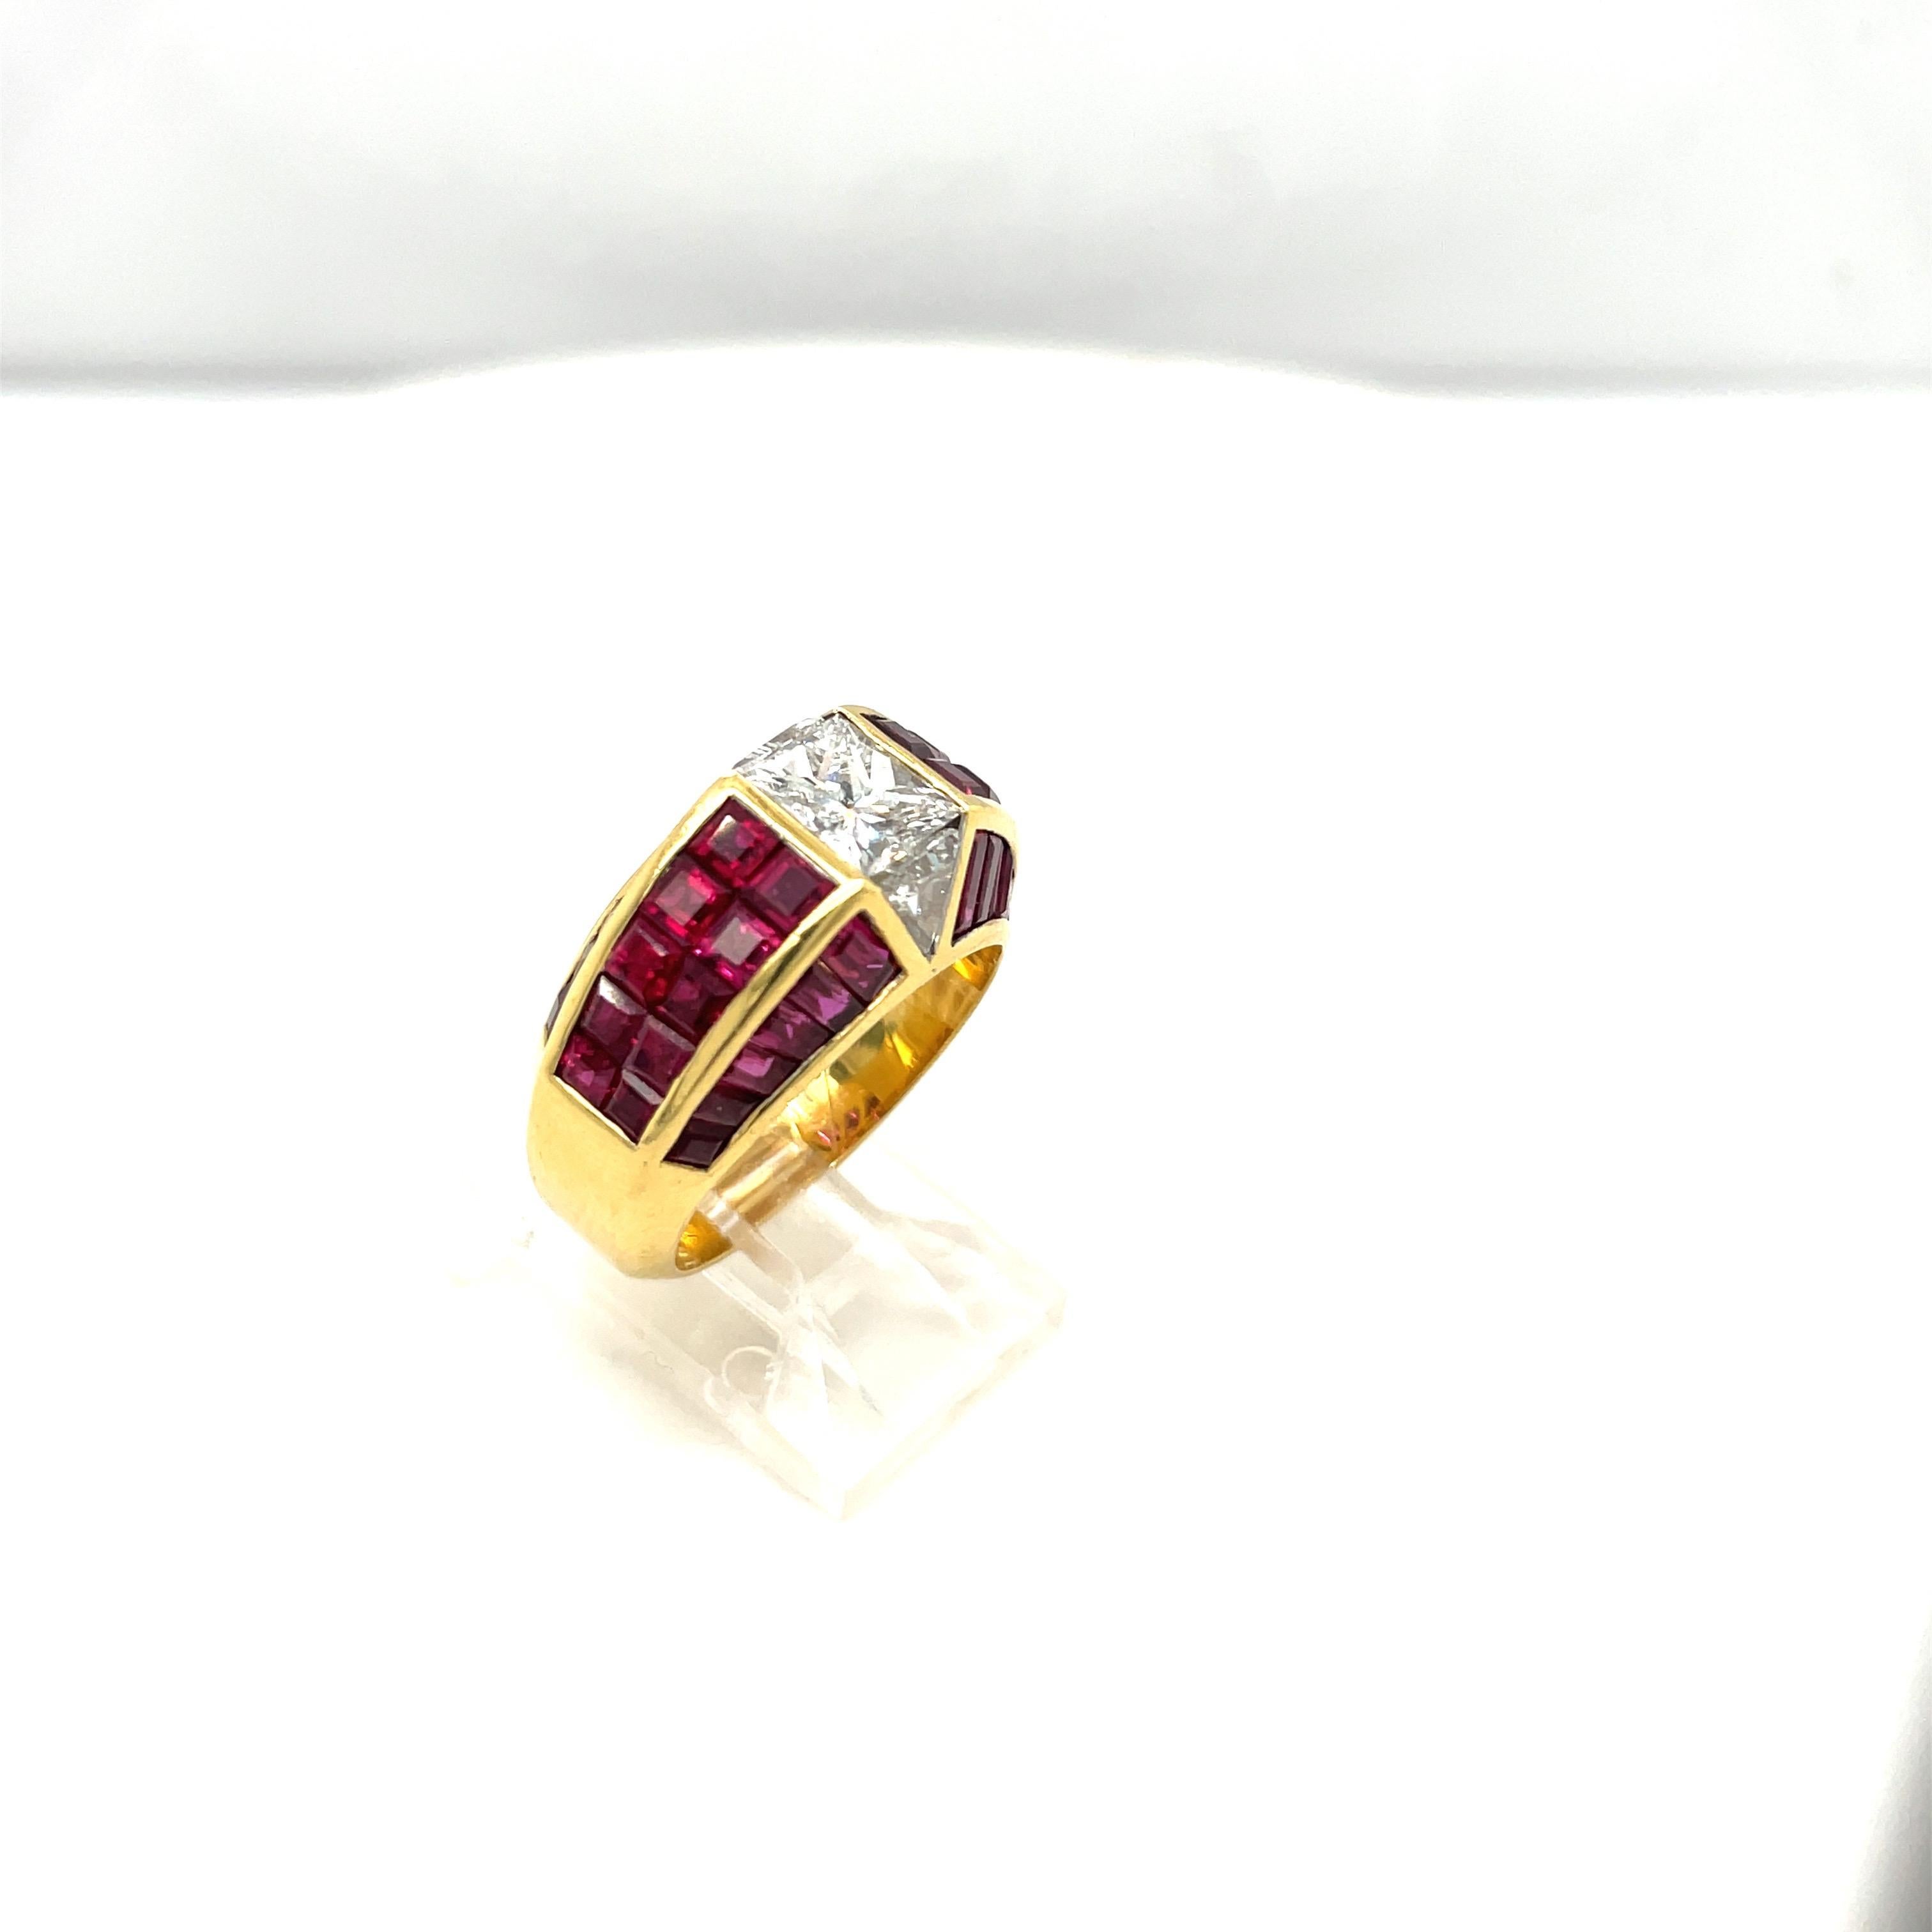 Under the trademark Quadrillion, Bez Ambar created the modern square shaped princess cut diamond. It became one the most innovative and widely used gemstone cuts of the 21st century.
This magnificent 18 karat yellow gold ring is designed with a